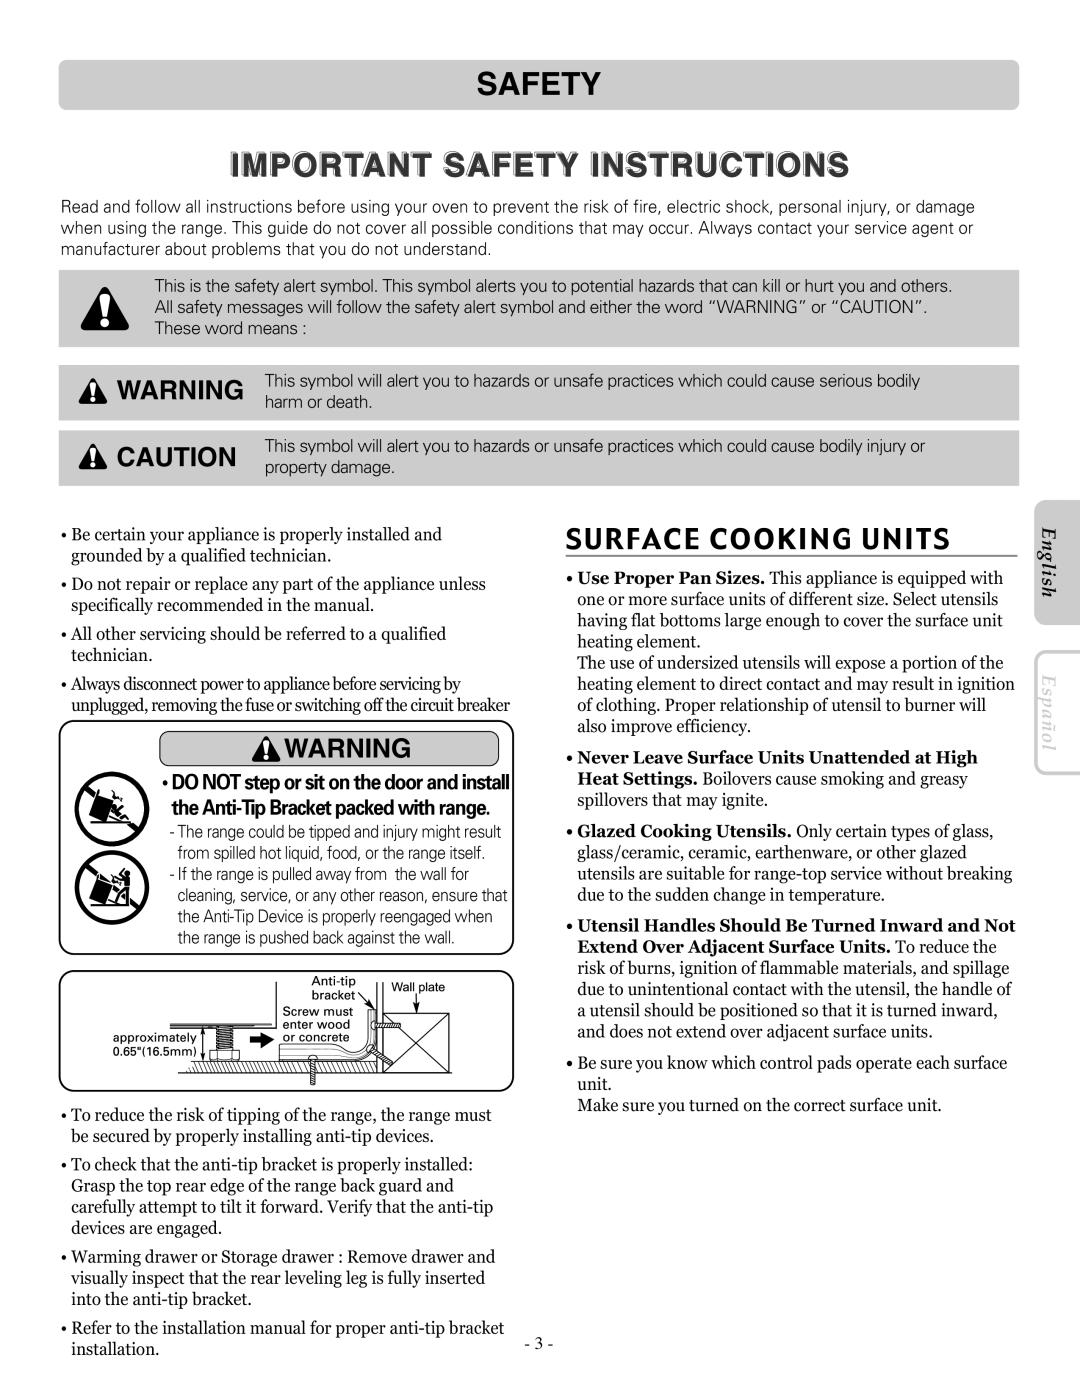 LG Electronics LRE30757SW, LRE30757ST Important Safety Instructions, Surface Cooking Units, English, Español 